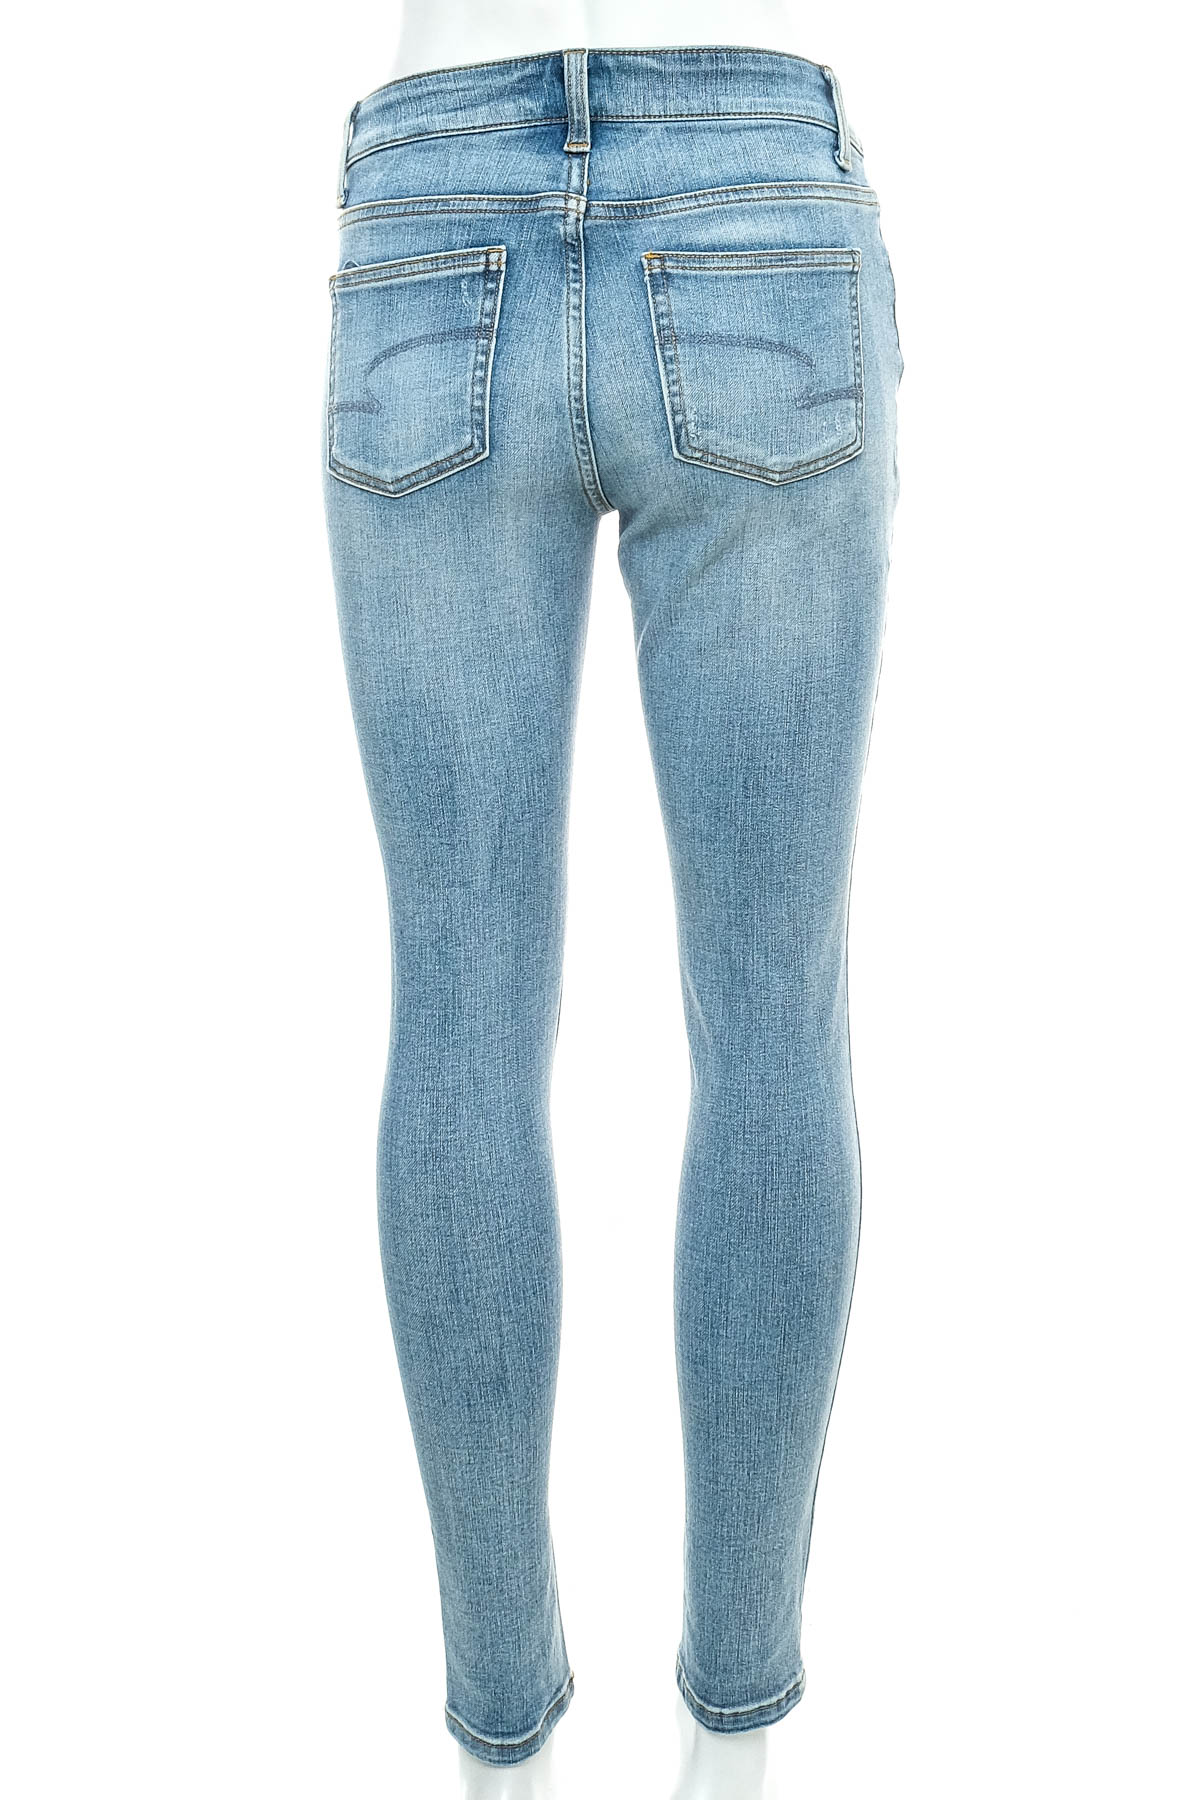 Women's jeans - TIME and TRU - 1